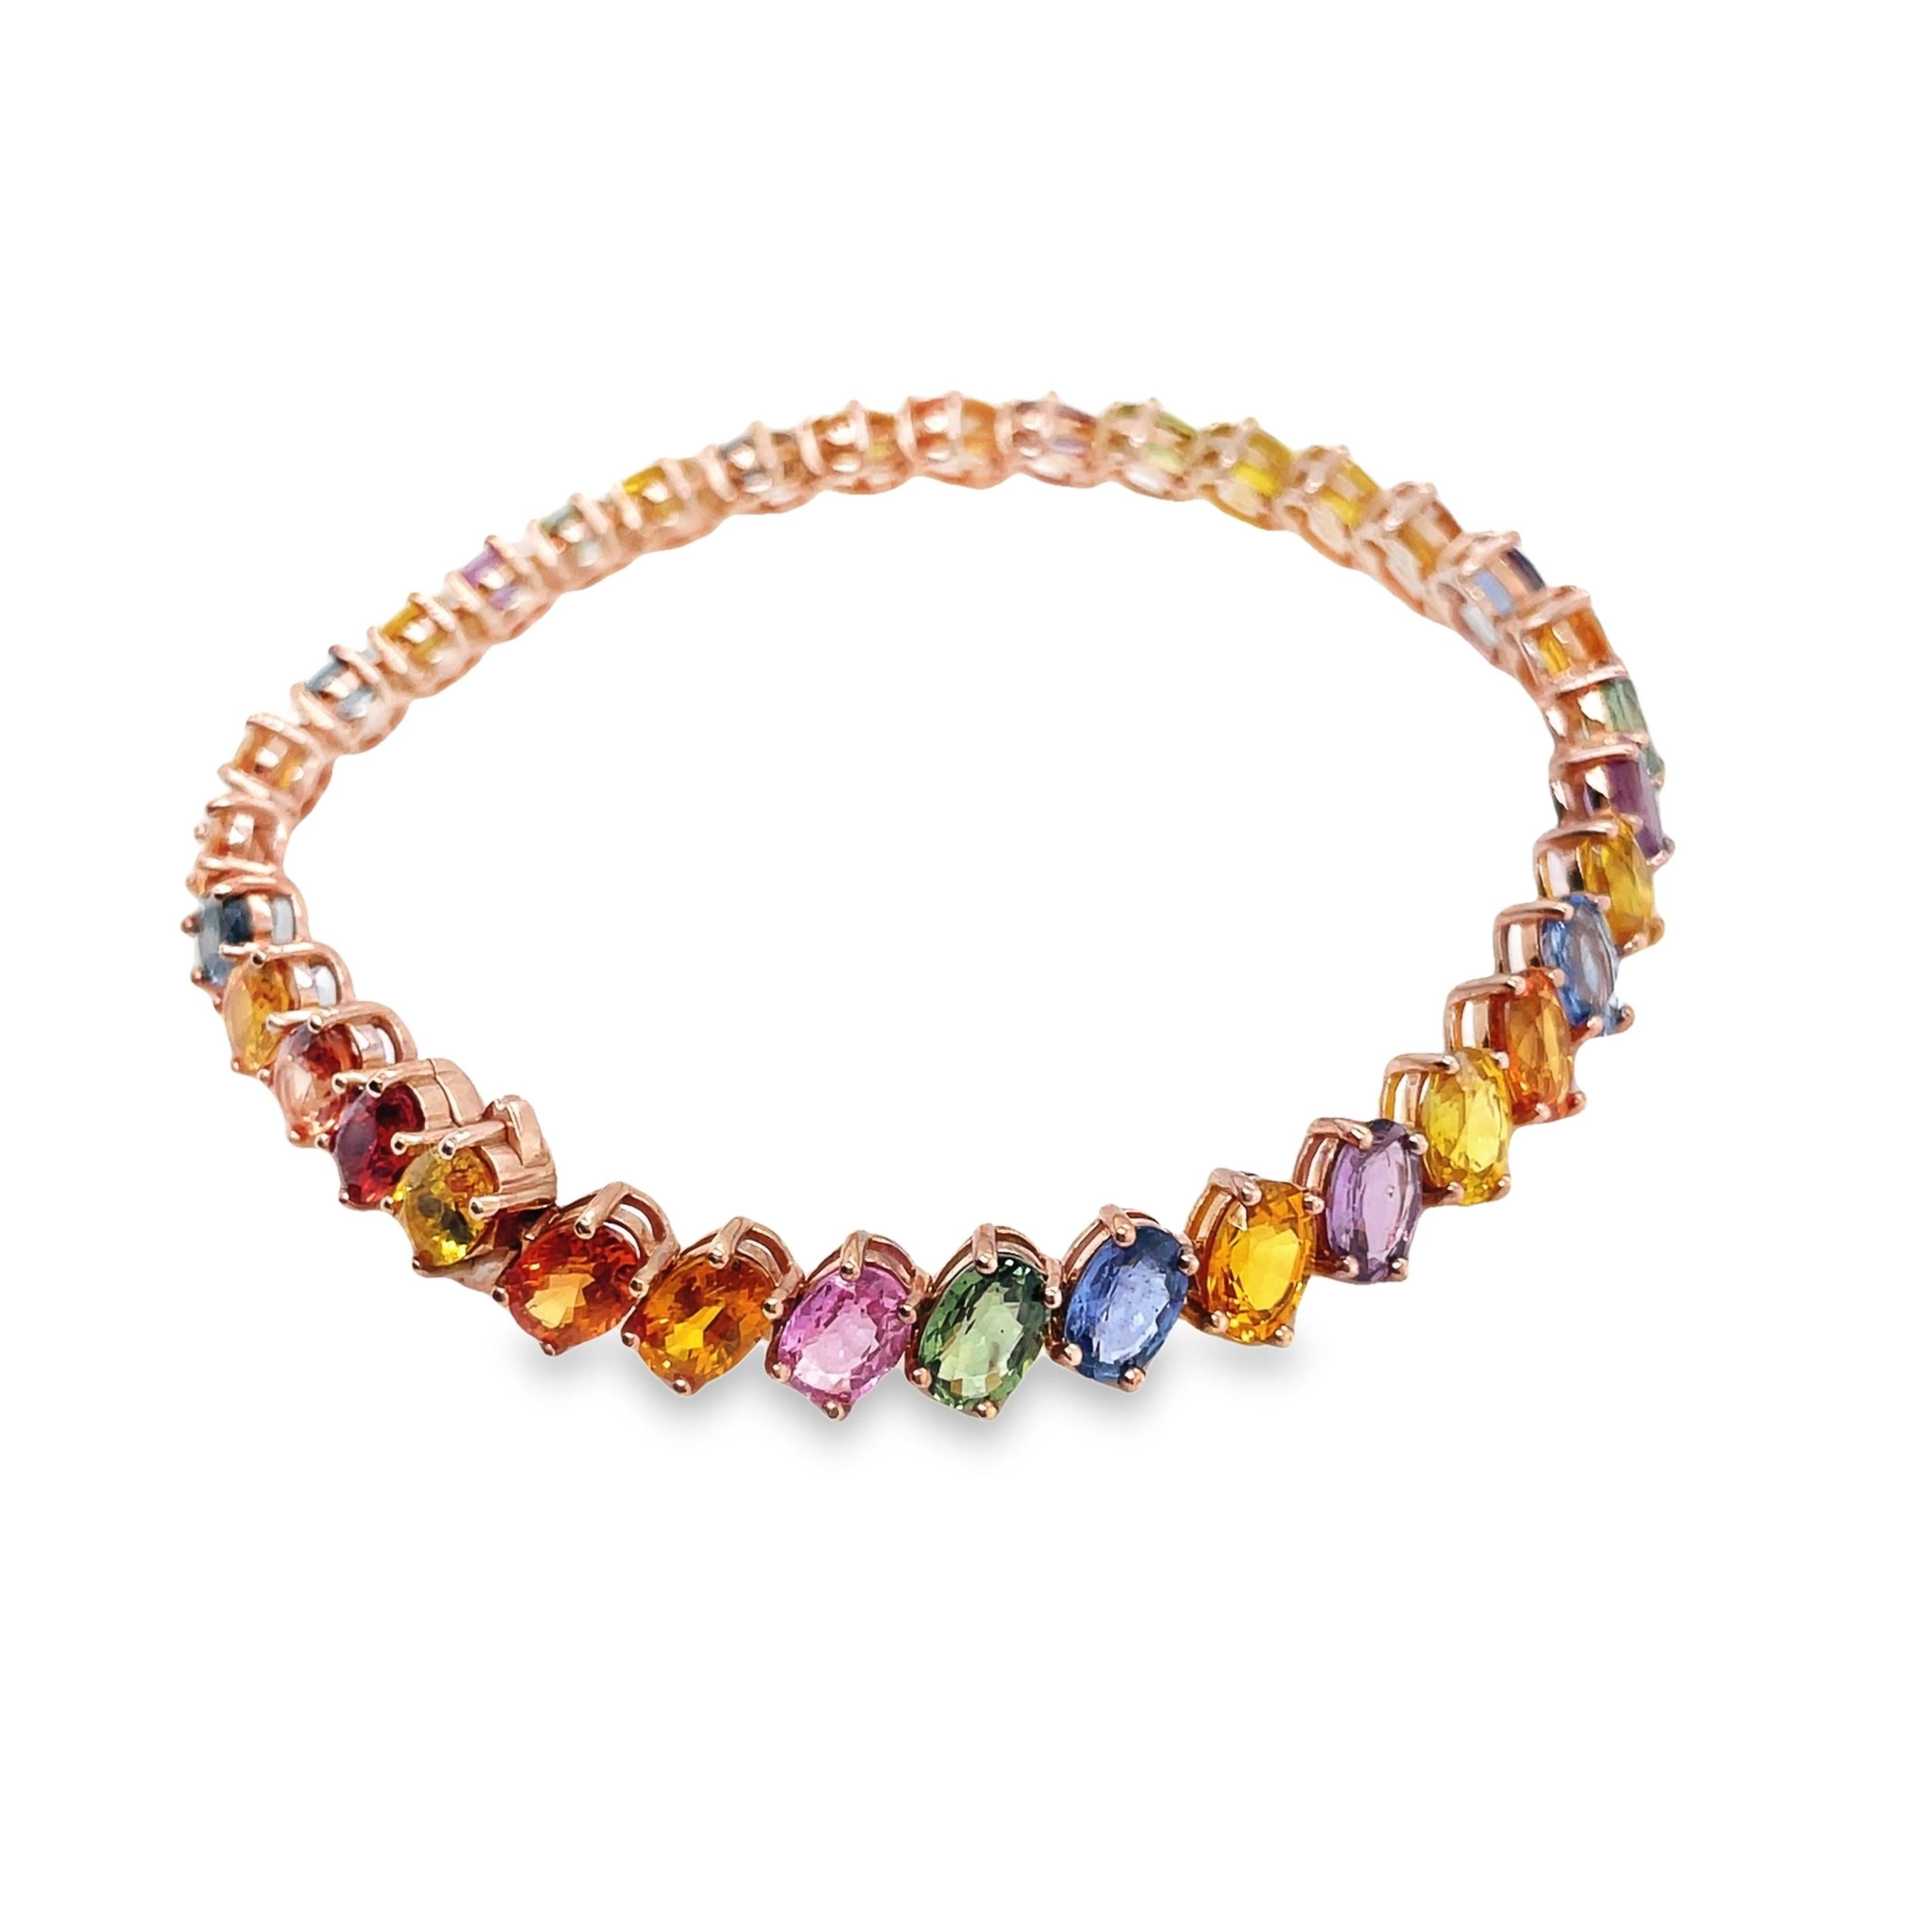 Explore the timeless beauty of our 14K pink gold bracelet, adorned with 35 pieces of natural multi-color sapphires totalling 21.35 carats. This exquisite piece, weighing a total of 14.52 grams, beautifully captures the spectrum of colors in each